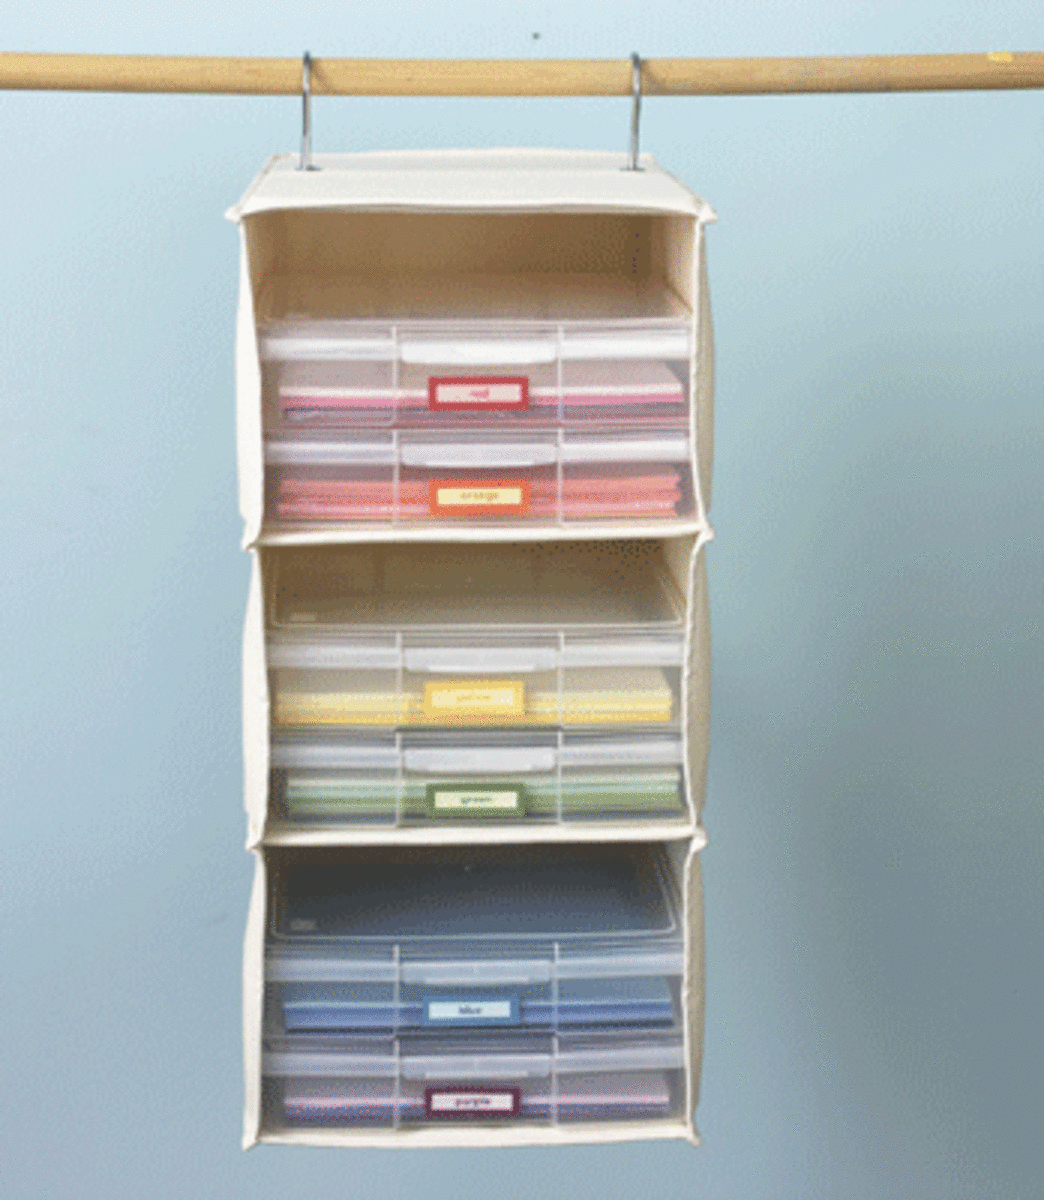 This system uses a closet sweater storage unit in a closet. Perfect idea if you have the storage space